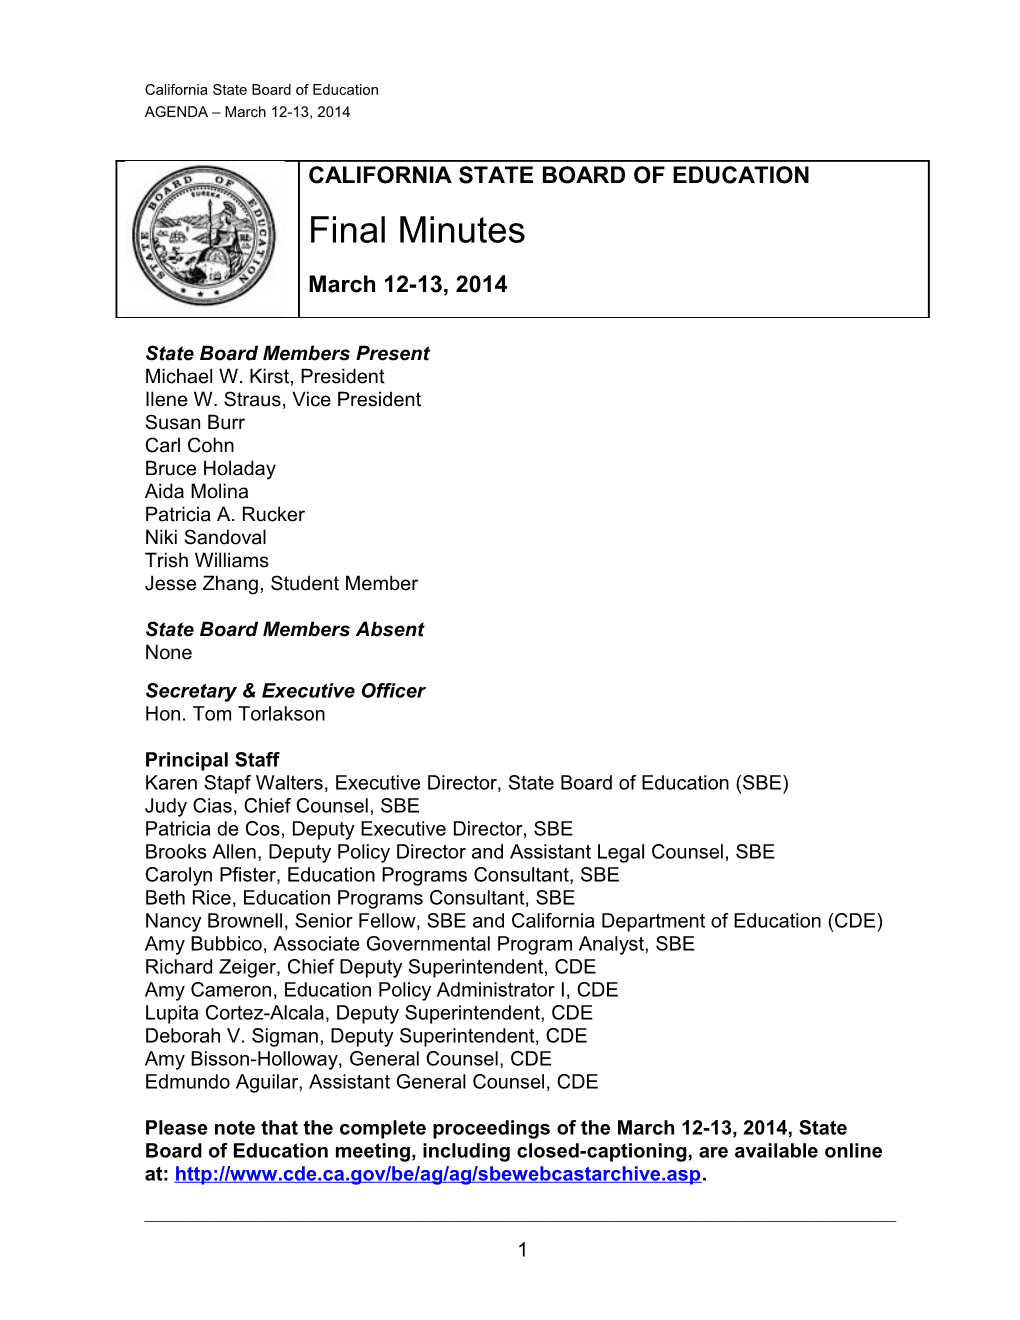 Final Minutes March 2014 - SBE Minutes (CA State Board of Education)